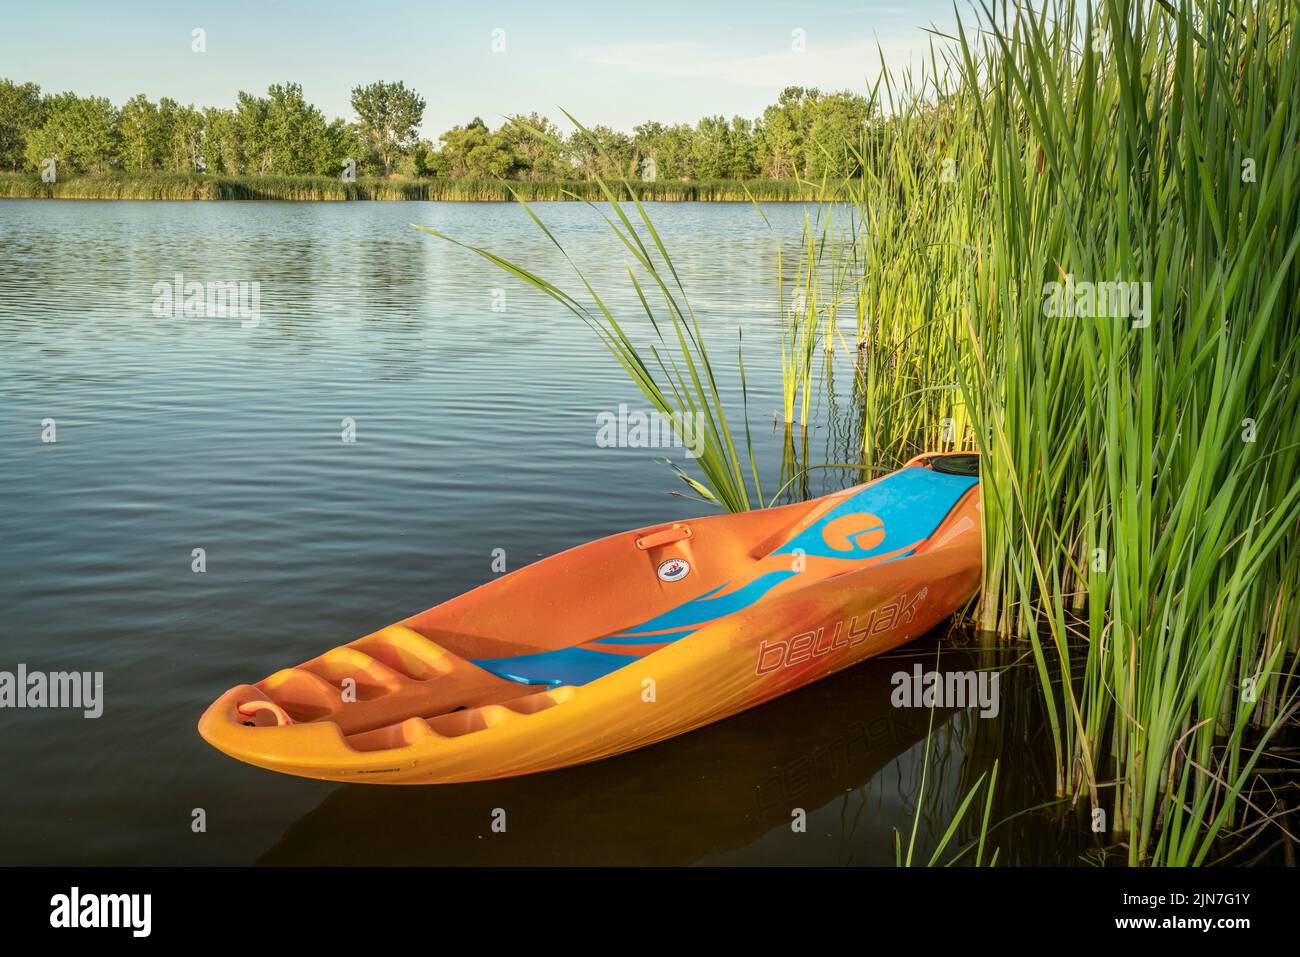 Fort Collins, CO, USA - July 11, 2022: Bellyak, prone kayak, in reeds at lake shore in Colorado, water recreation which combines the best aspects of k Stock Photo